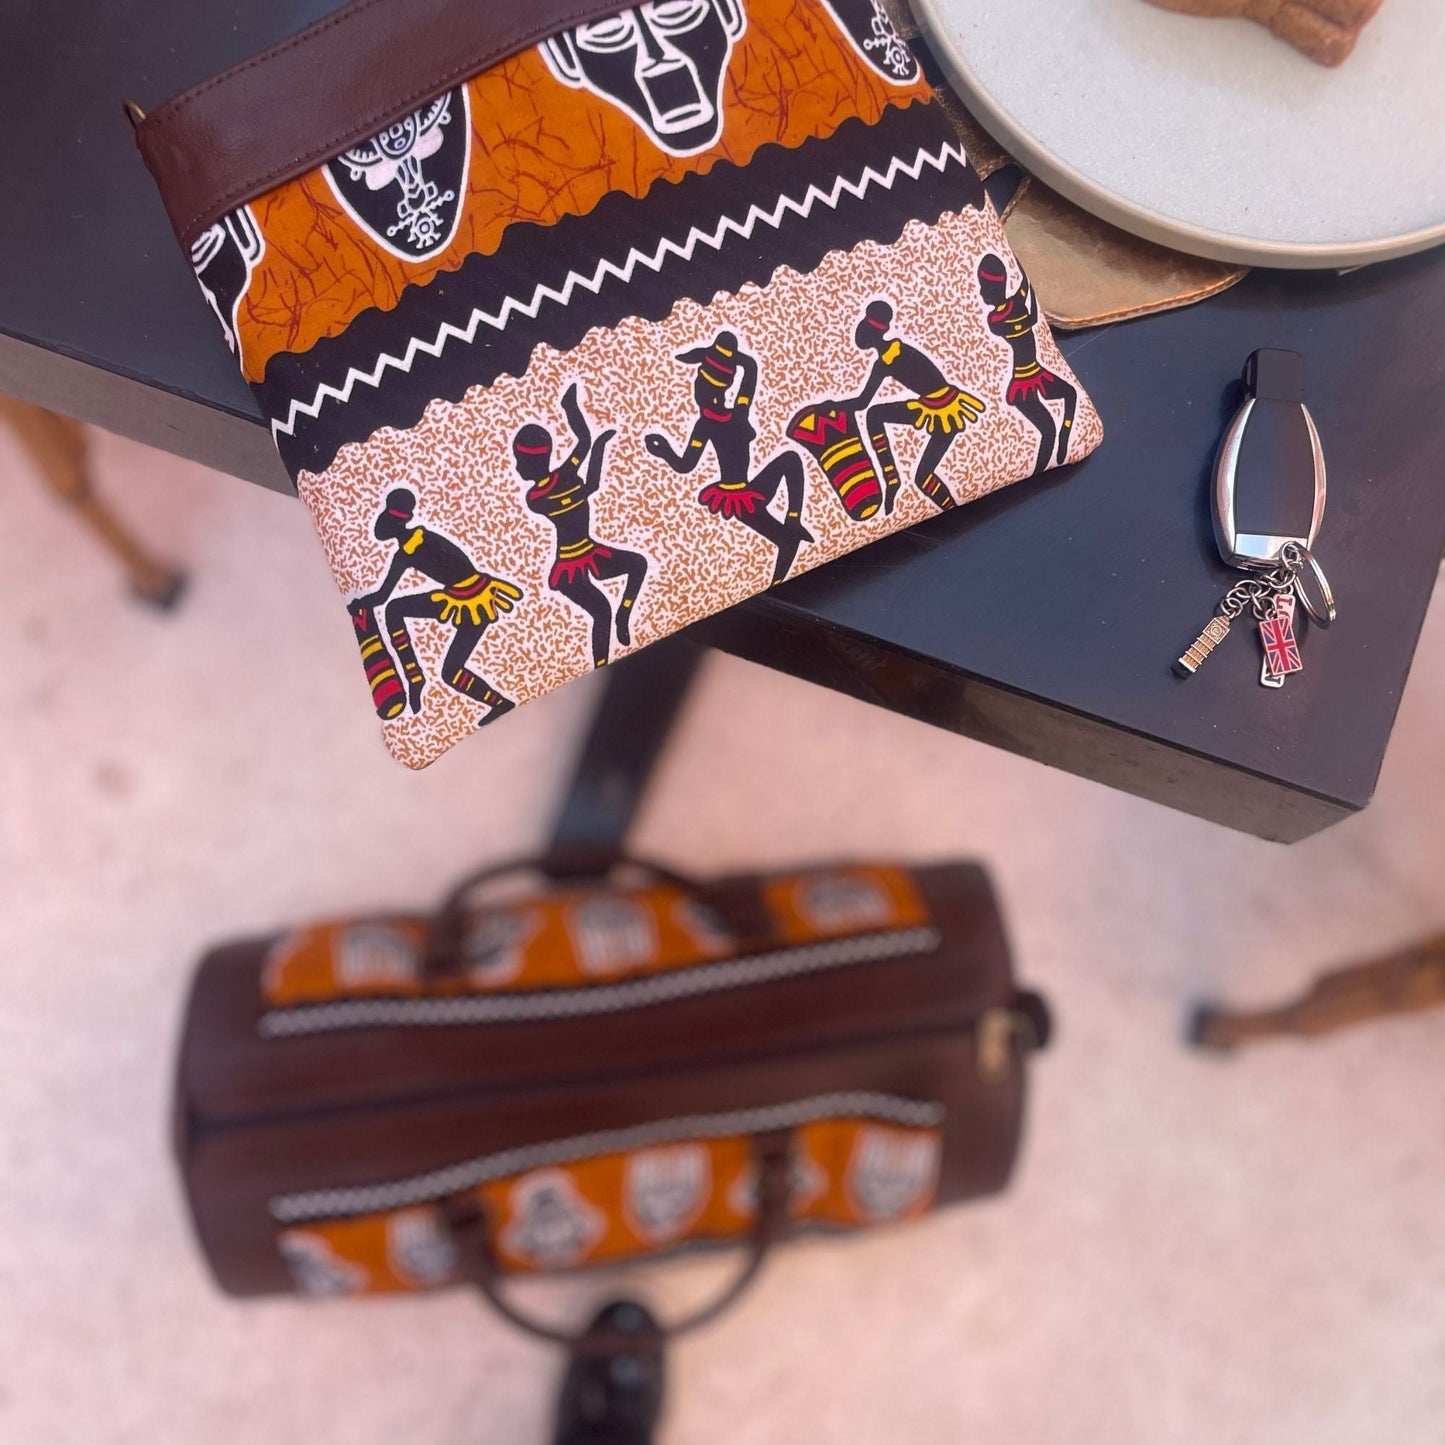 "Gnawa" Leather Duffle Bag With Matched Clutch - Trendiesty Worldwide